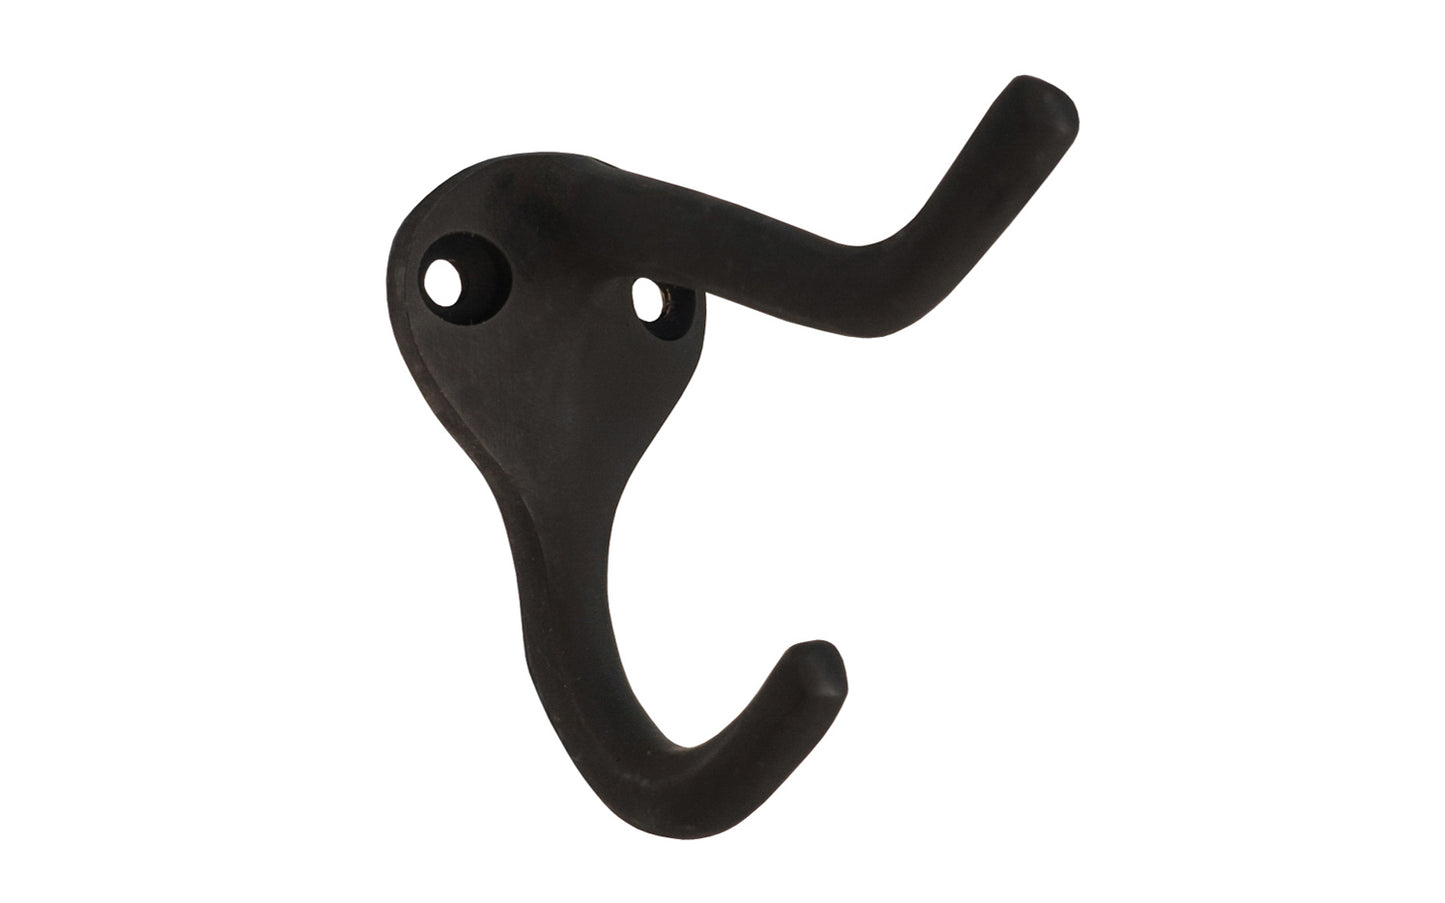 Ives Solid Brass Double Hook. Great for kitchens, bathrooms, hallways, furniture, cabinets, bedrooms. The two prong hook is made of solid brass material, making it durable for clothing, towels, bags. Hat & Coat Hook. Oil Rubbed Bronze Finish.